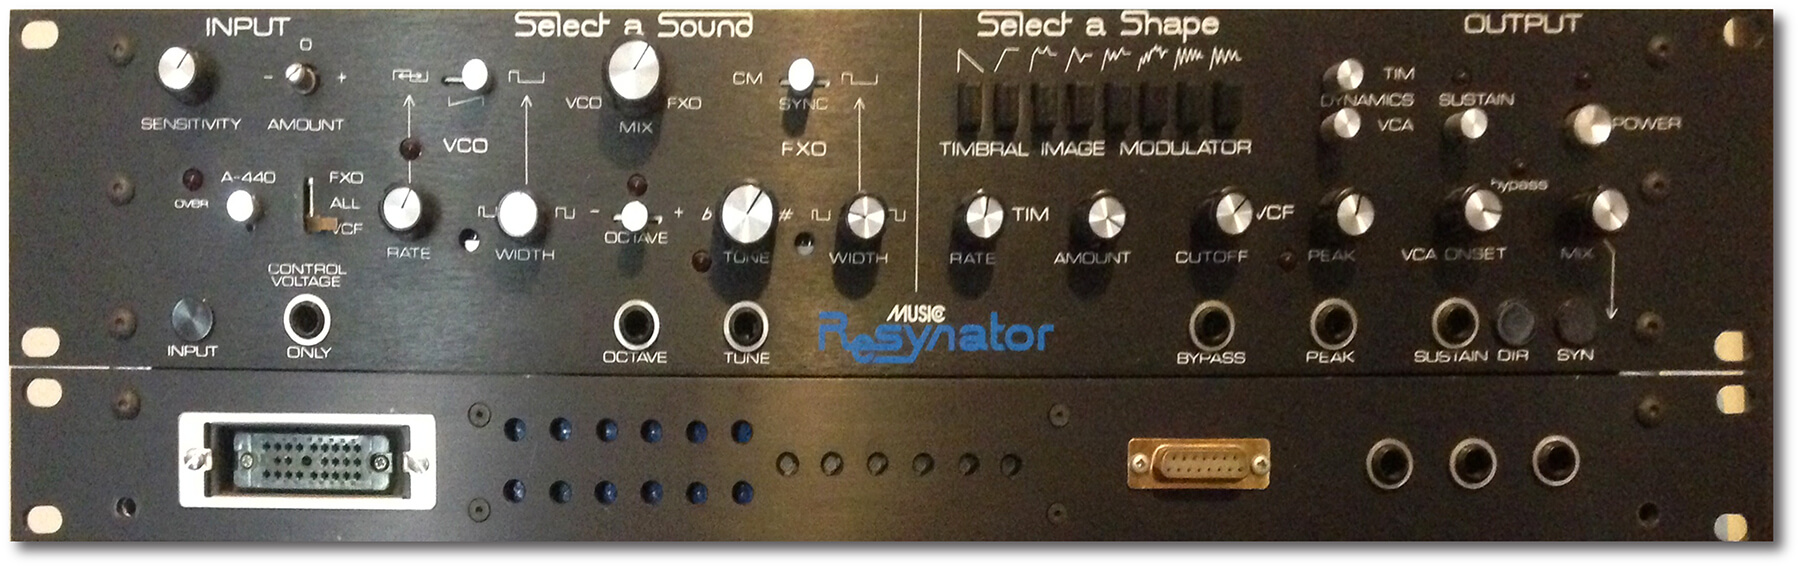 Resynator with Roland 24 -pin vintage guitar input